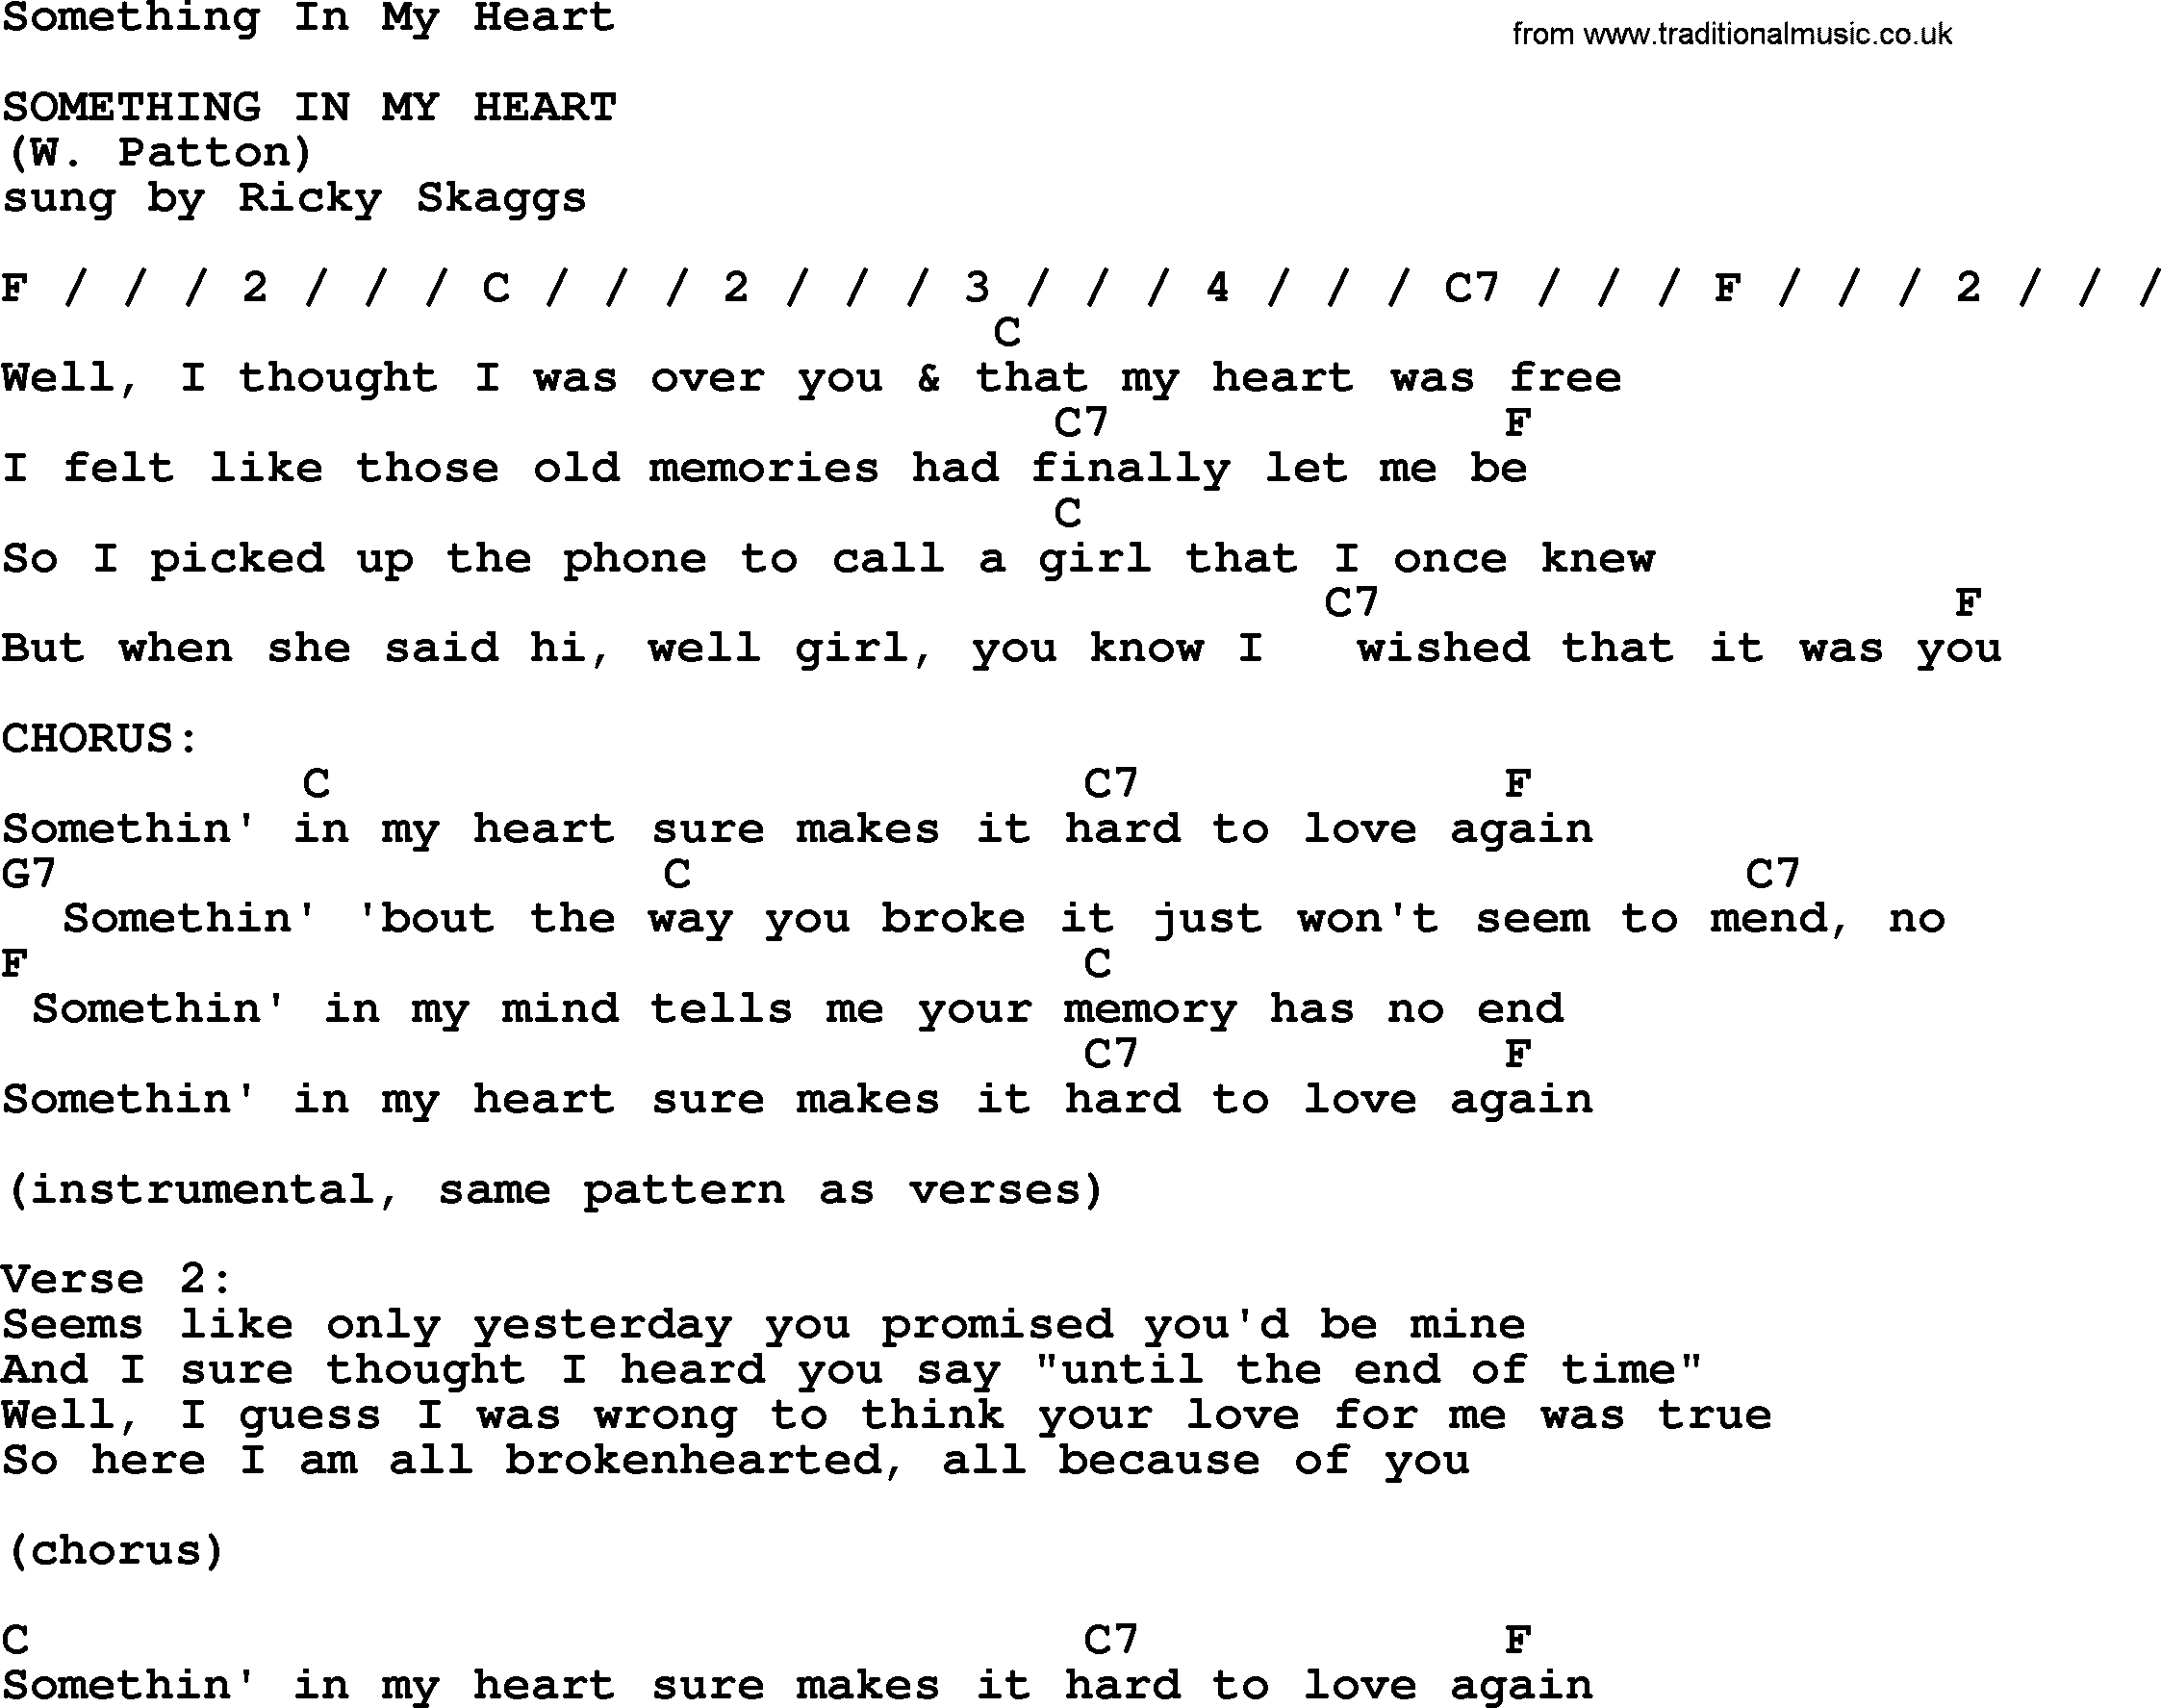 Bluegrass song: Something In My Heart, lyrics and chords